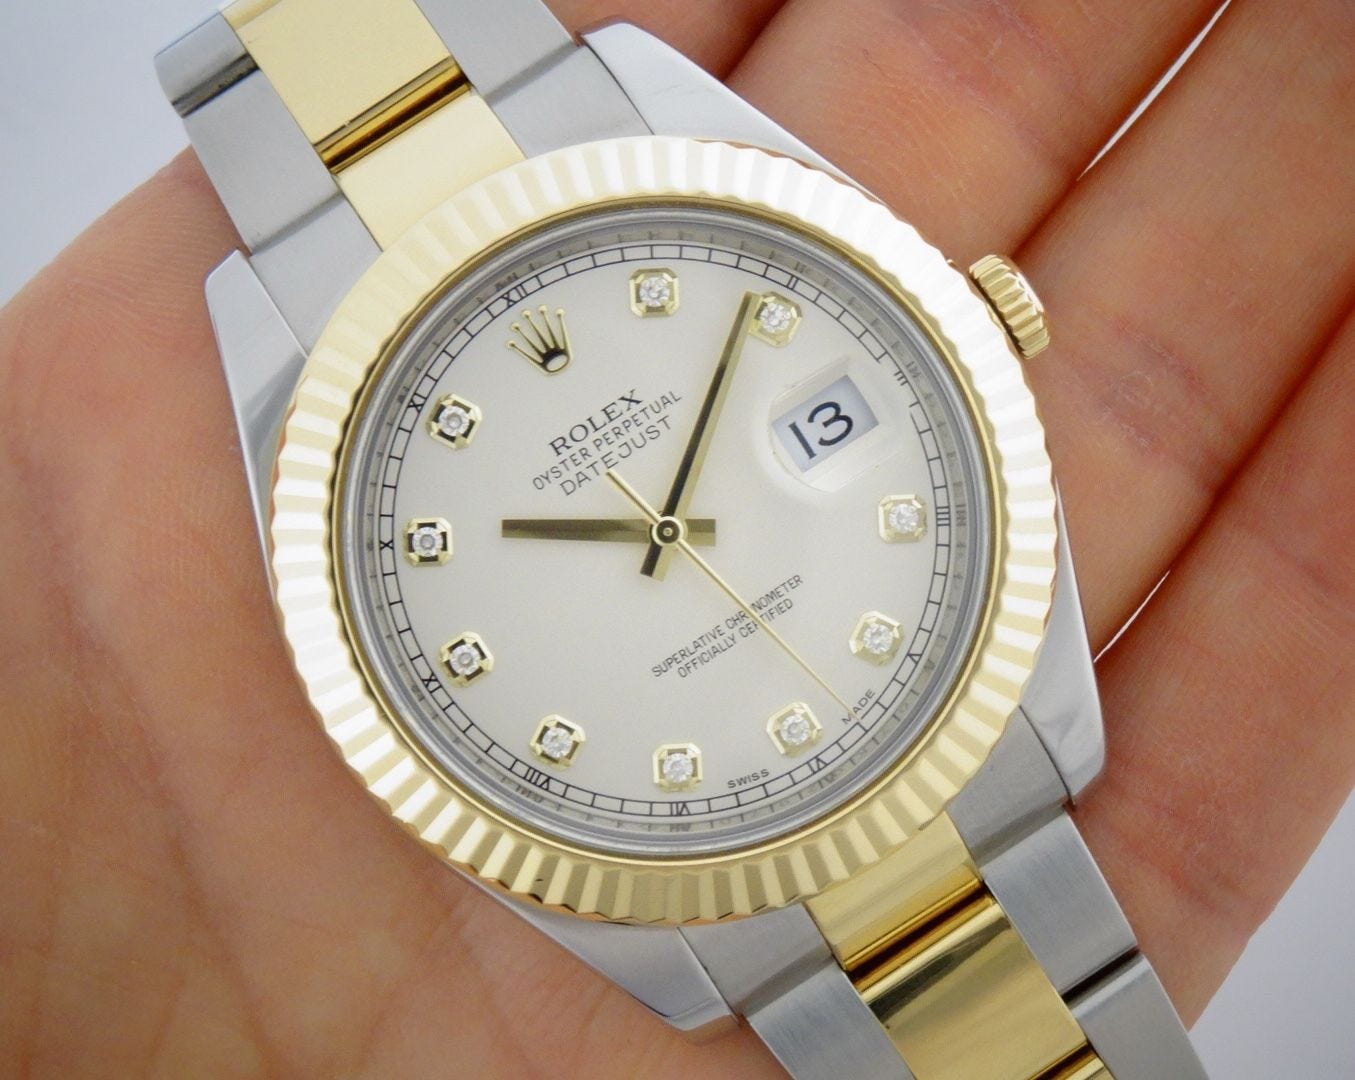 Nine Ways to Spot a Fake Rolex. Rolex is one of the world's most famous… |  by Idan | Medium